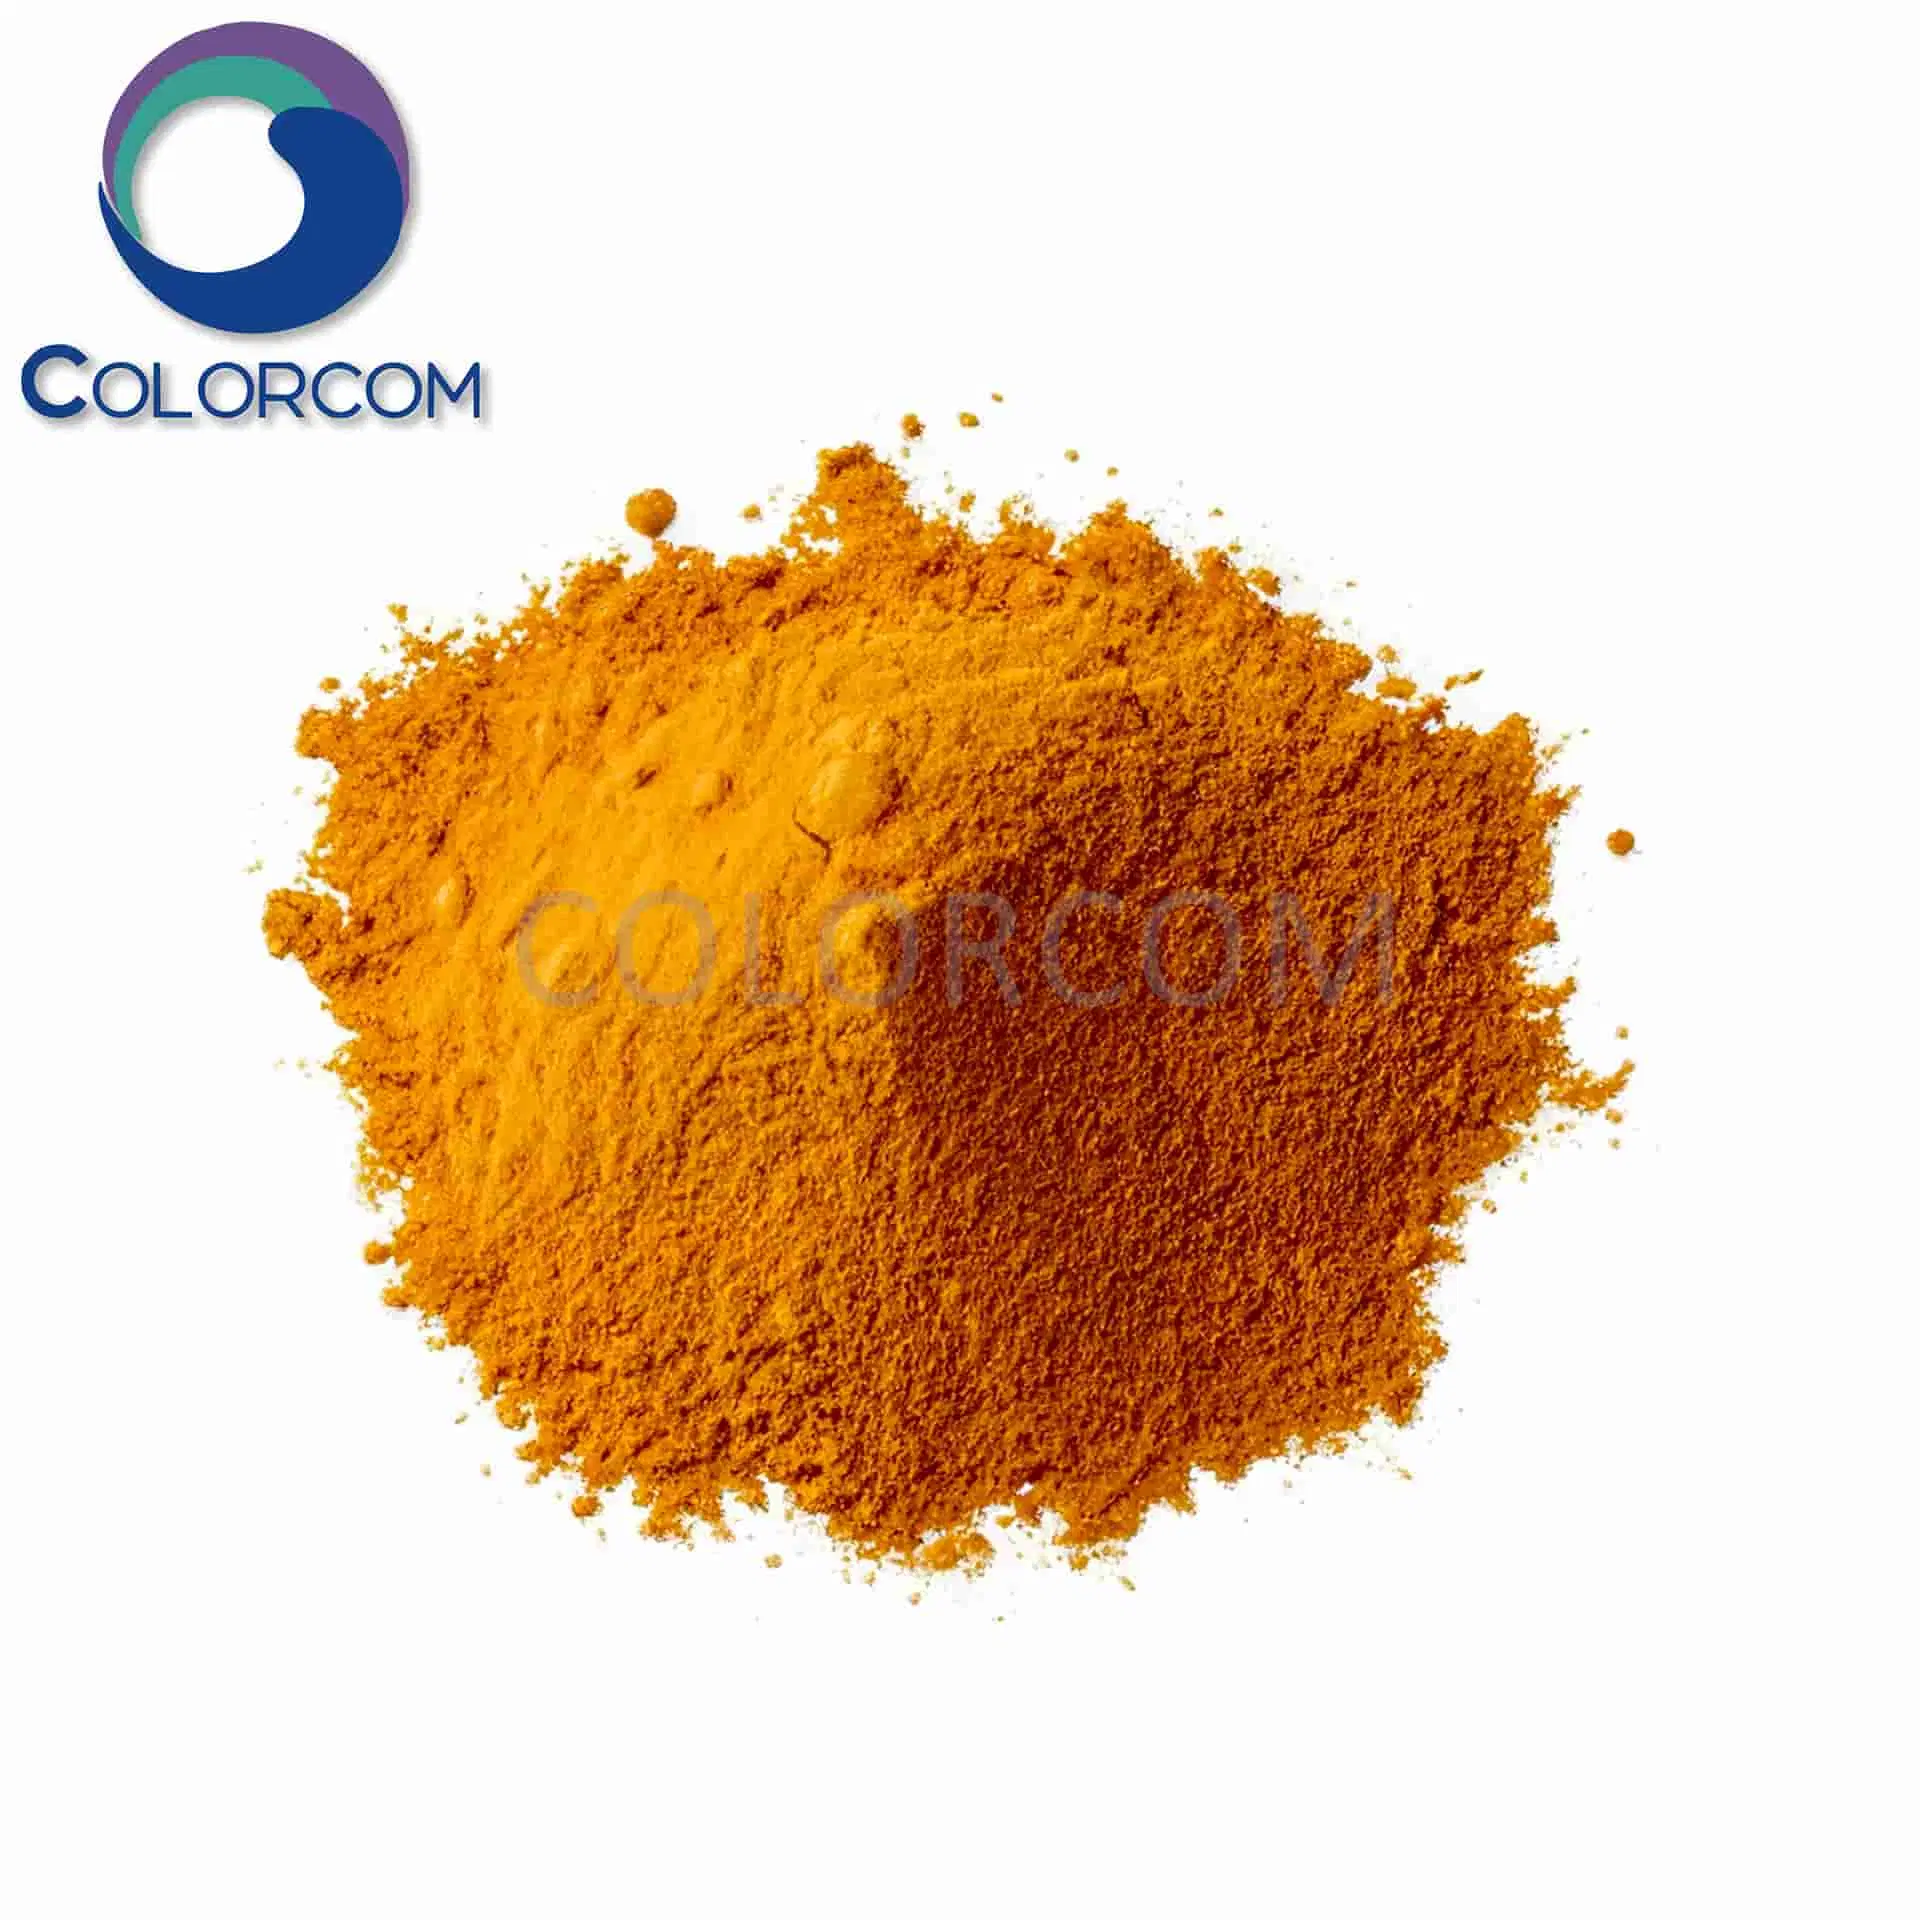 Pigment Grey Used in Ceramic and Crafts of Orange and Black Color by Ceramic Pigment